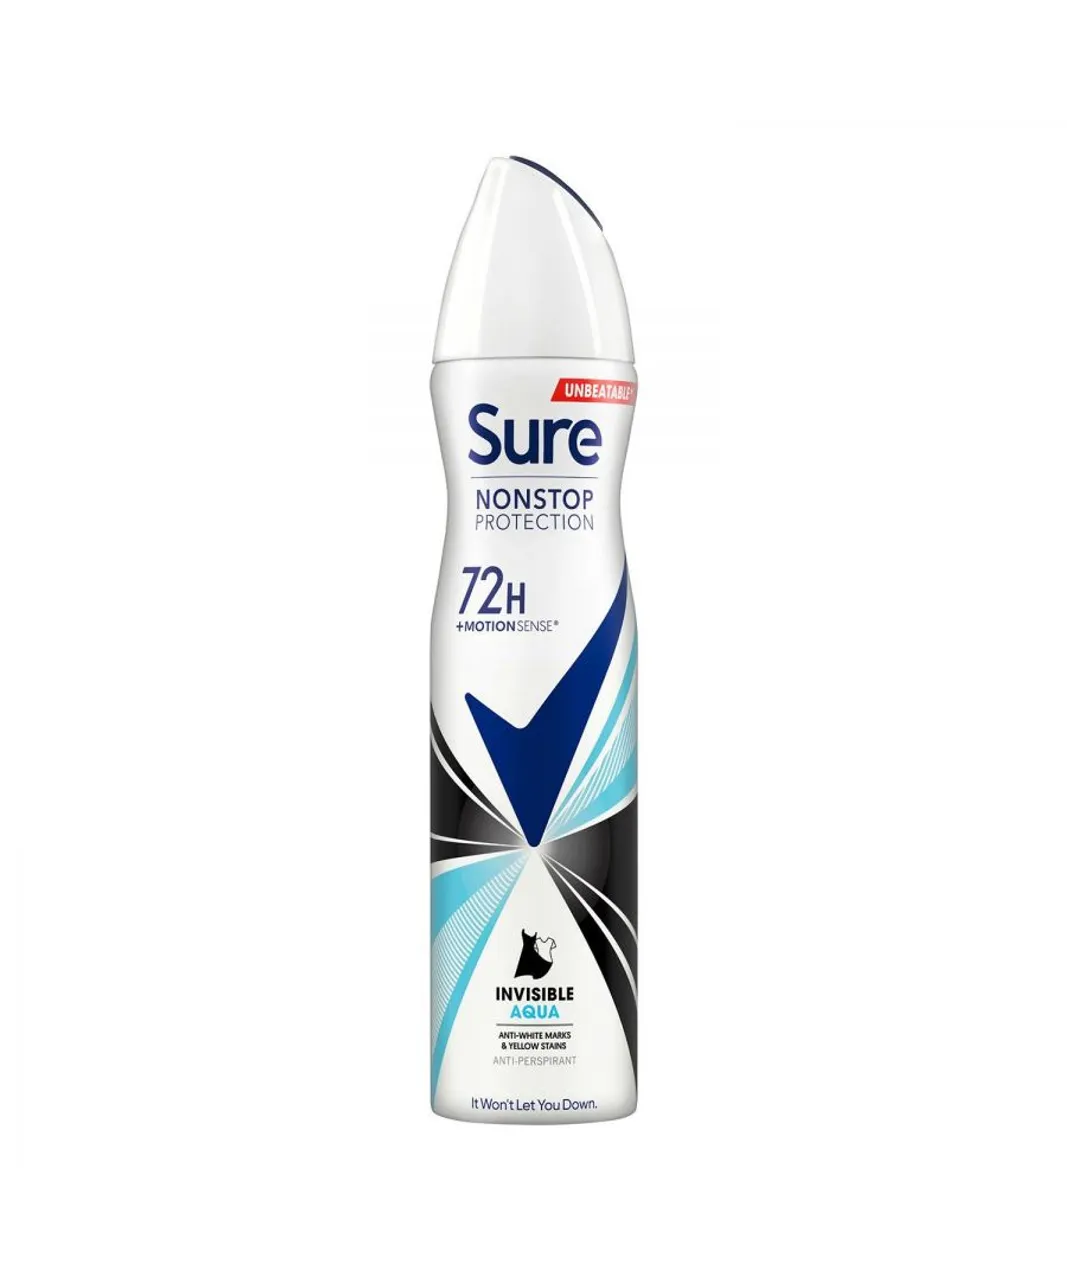 Sure Womens Women Anti-perspirant 72H Nonstop Protection Invisible Aqua Deo 250ml, 6 Pack - One Size